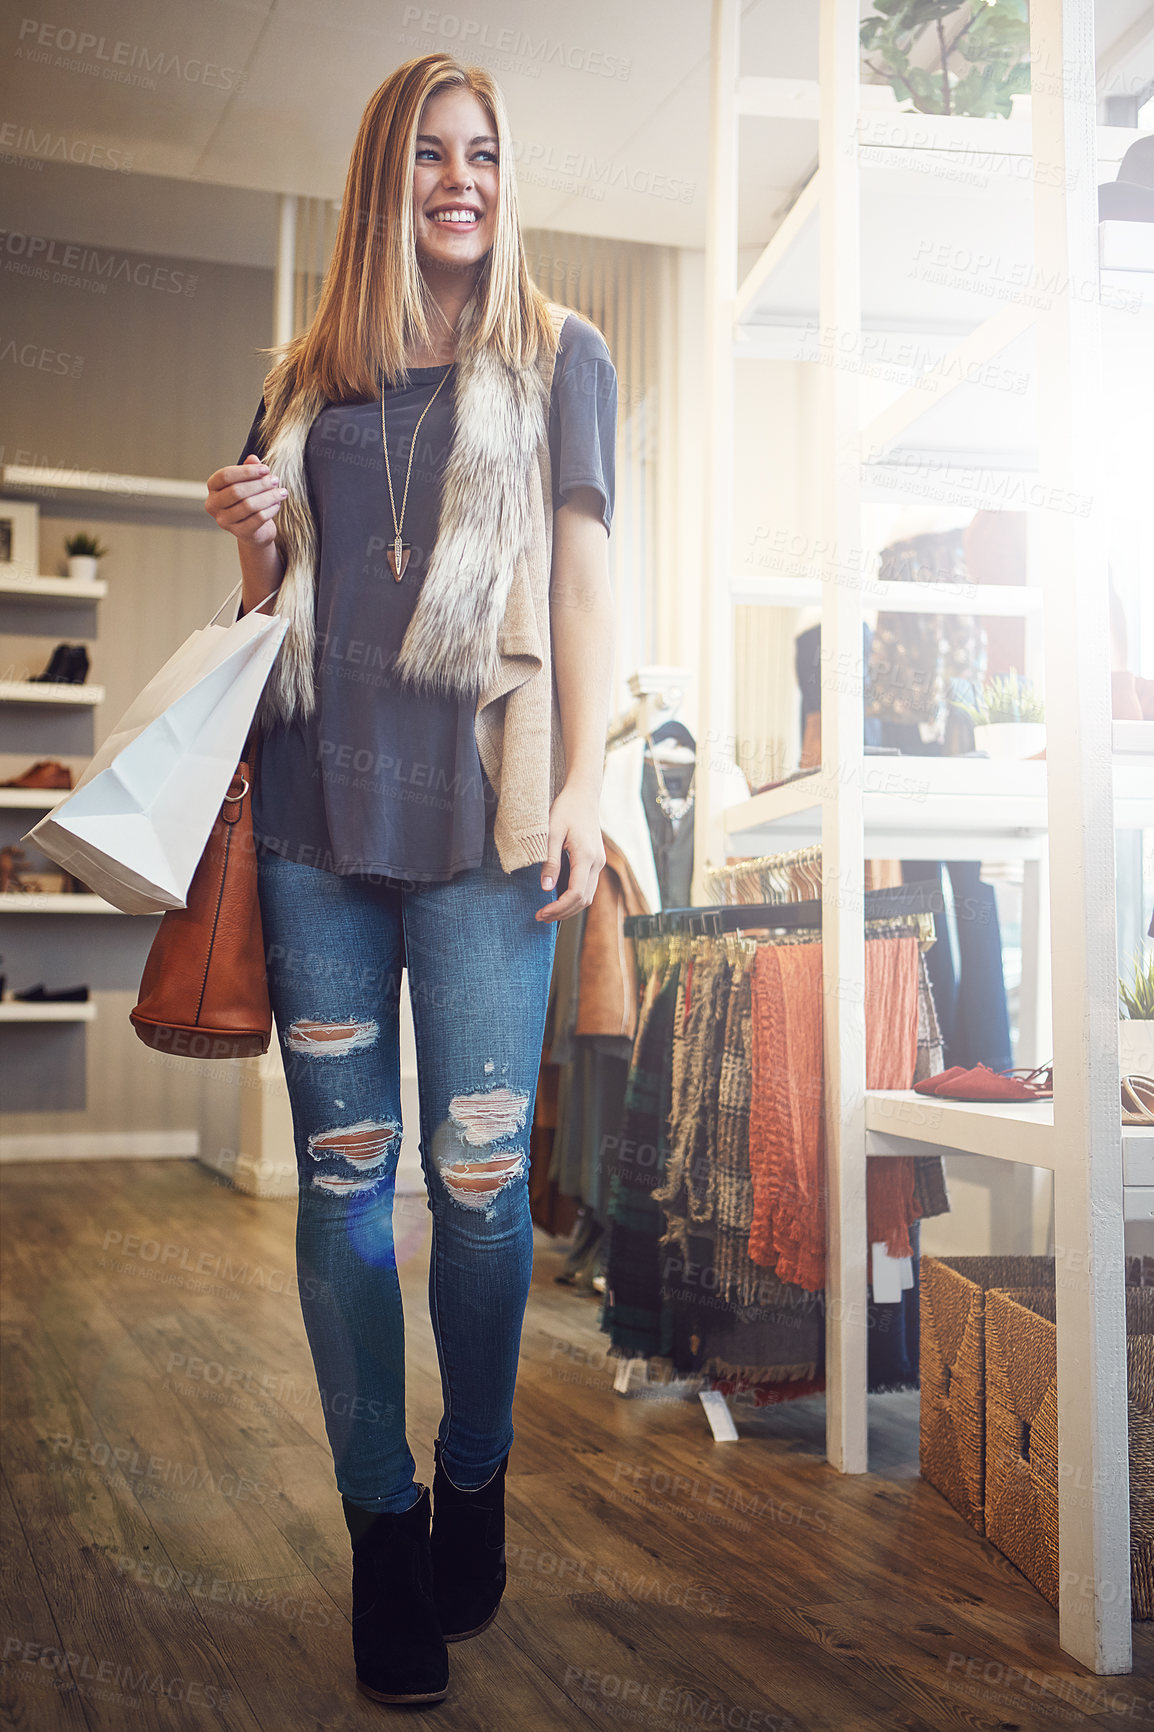 Buy stock photo Shot of a young woman walking though a boutique with a shopping bag